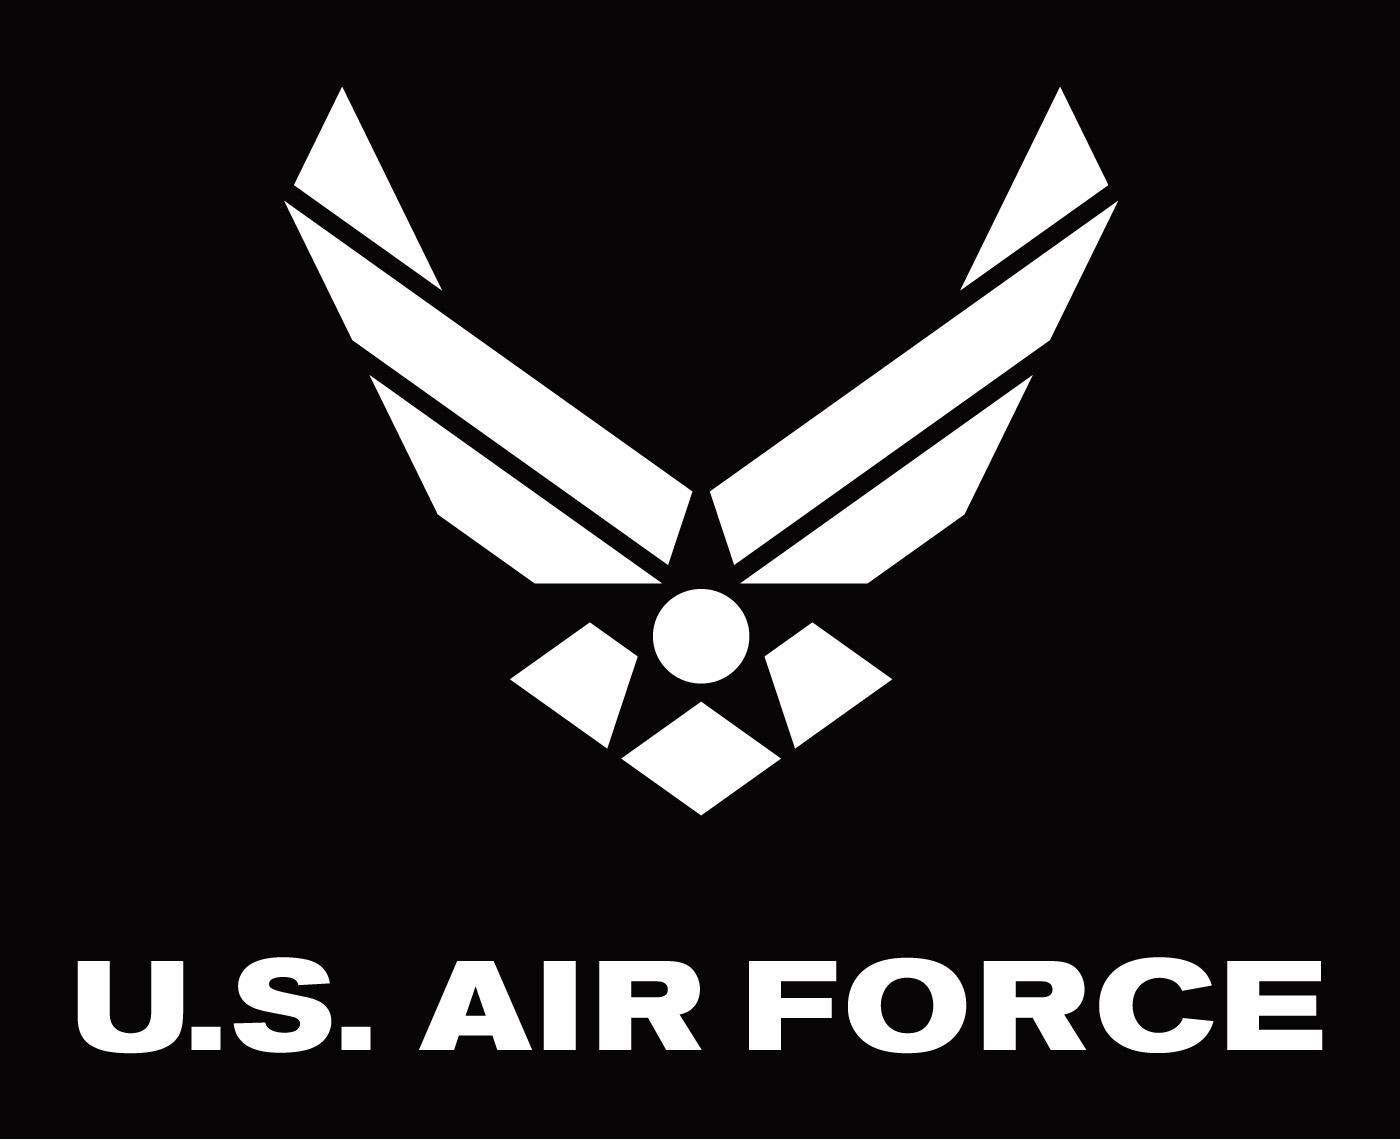 Aerojet Logo - Sigma Labs Joins Aerojet Rocketdyne in Quality Control For Air Force ...